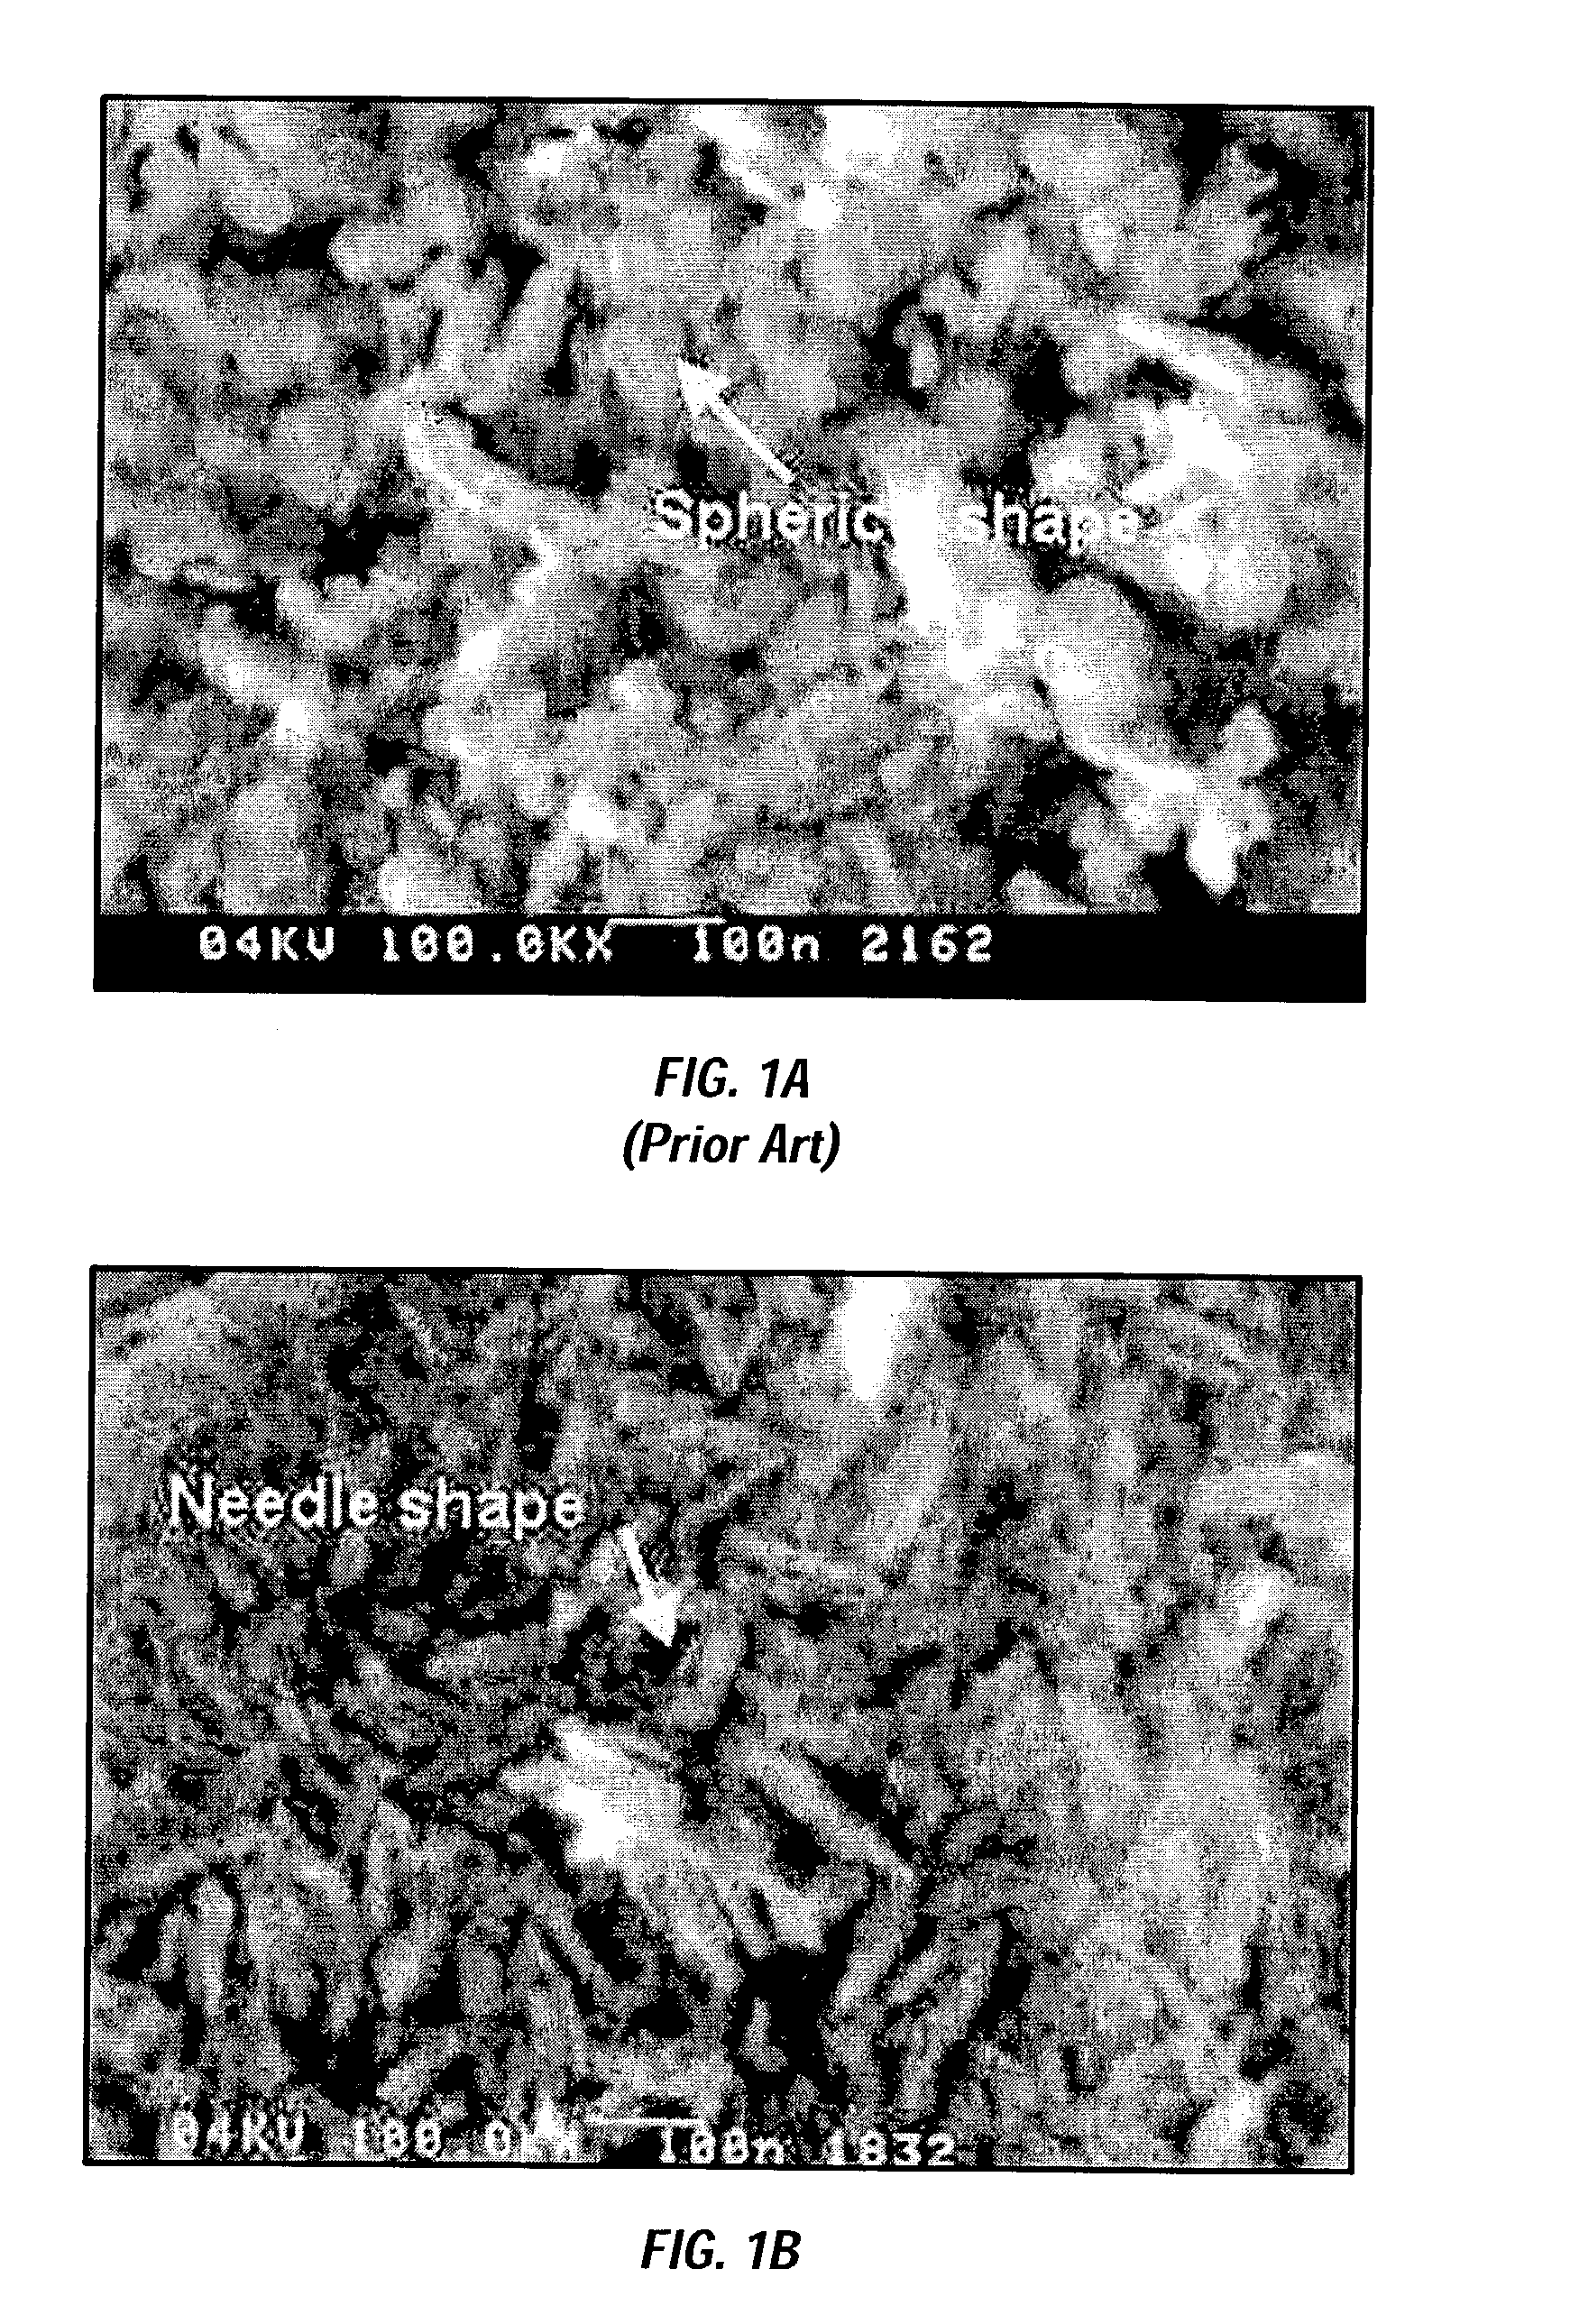 Boehmite particles and polymer materials incorporating same